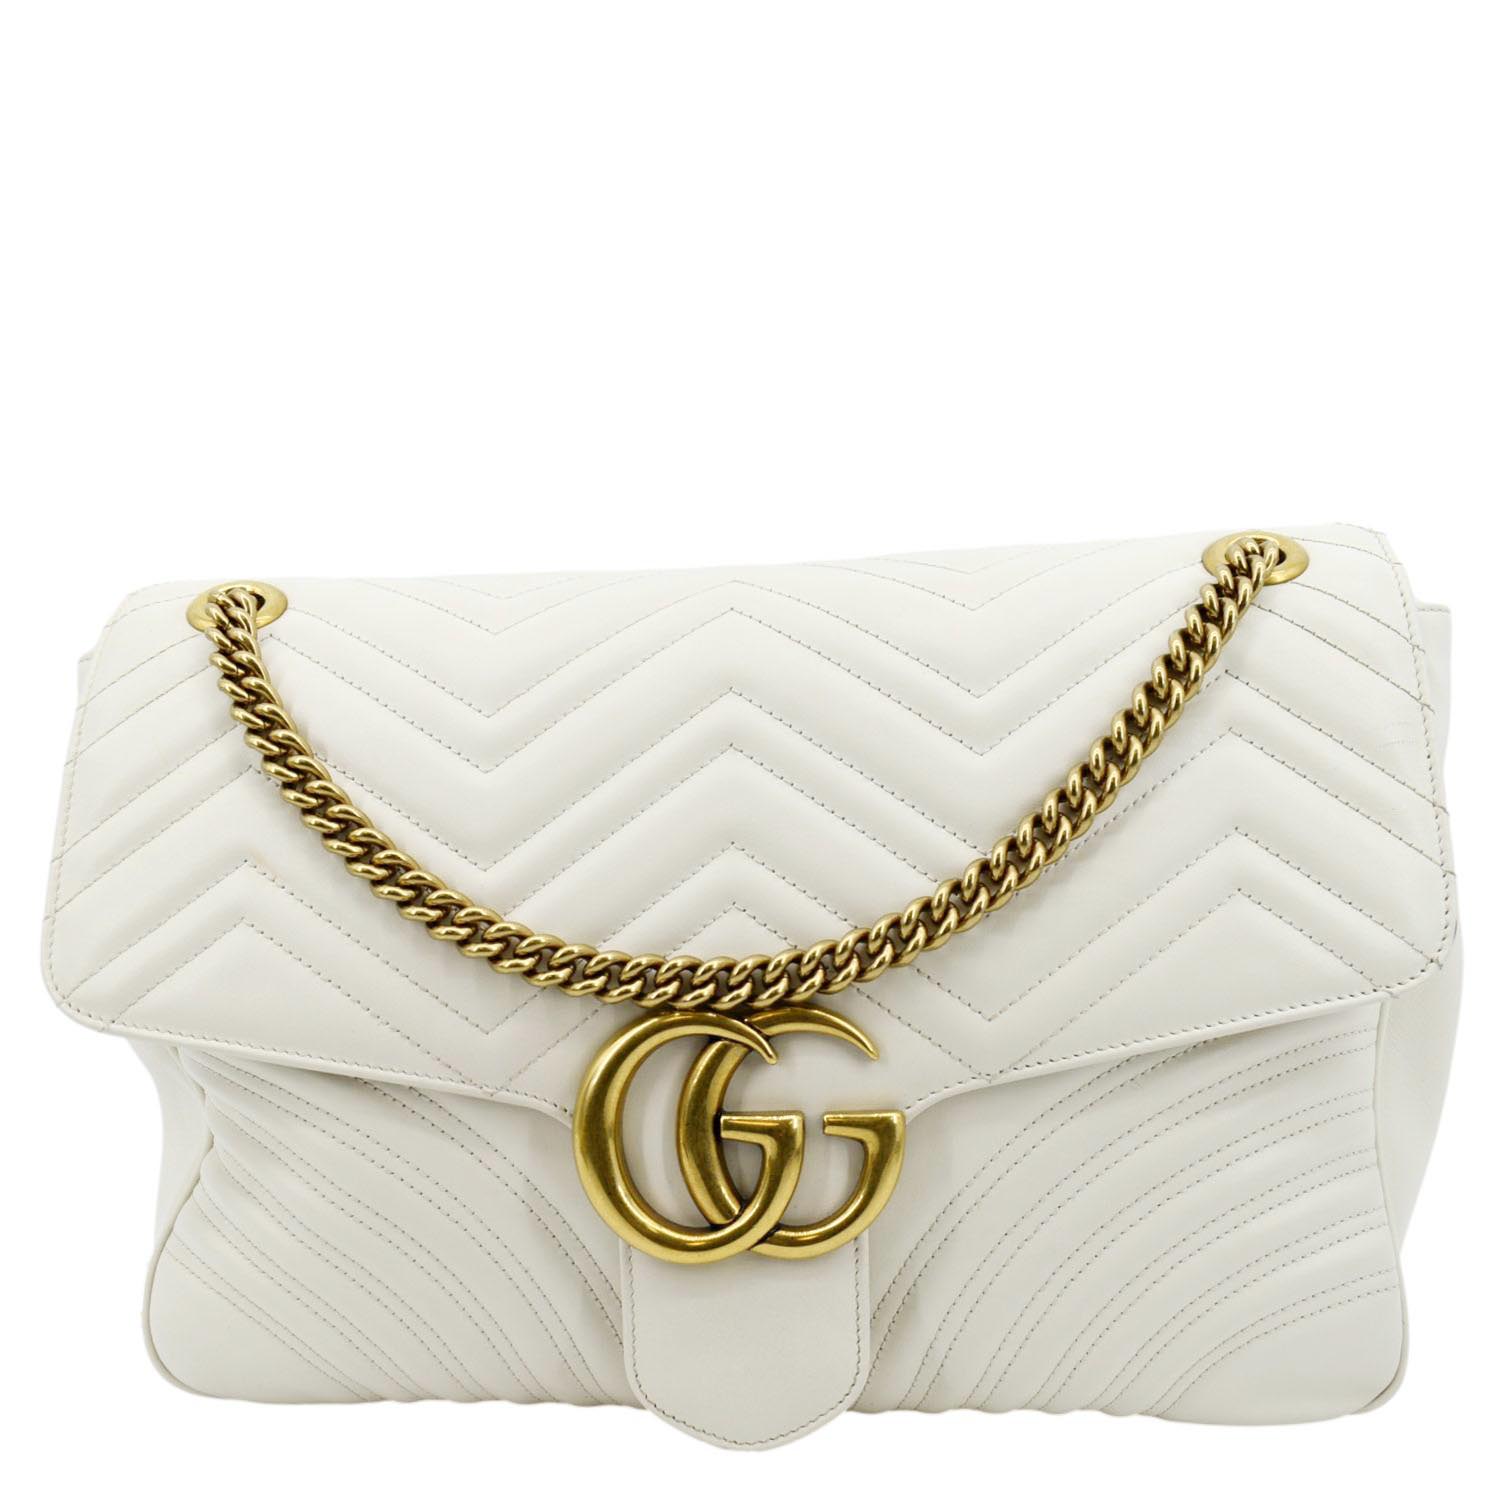 Gucci Green Matelasse Leather Small GG Marmont Shoulder Bag Gucci | The  Luxury Closet